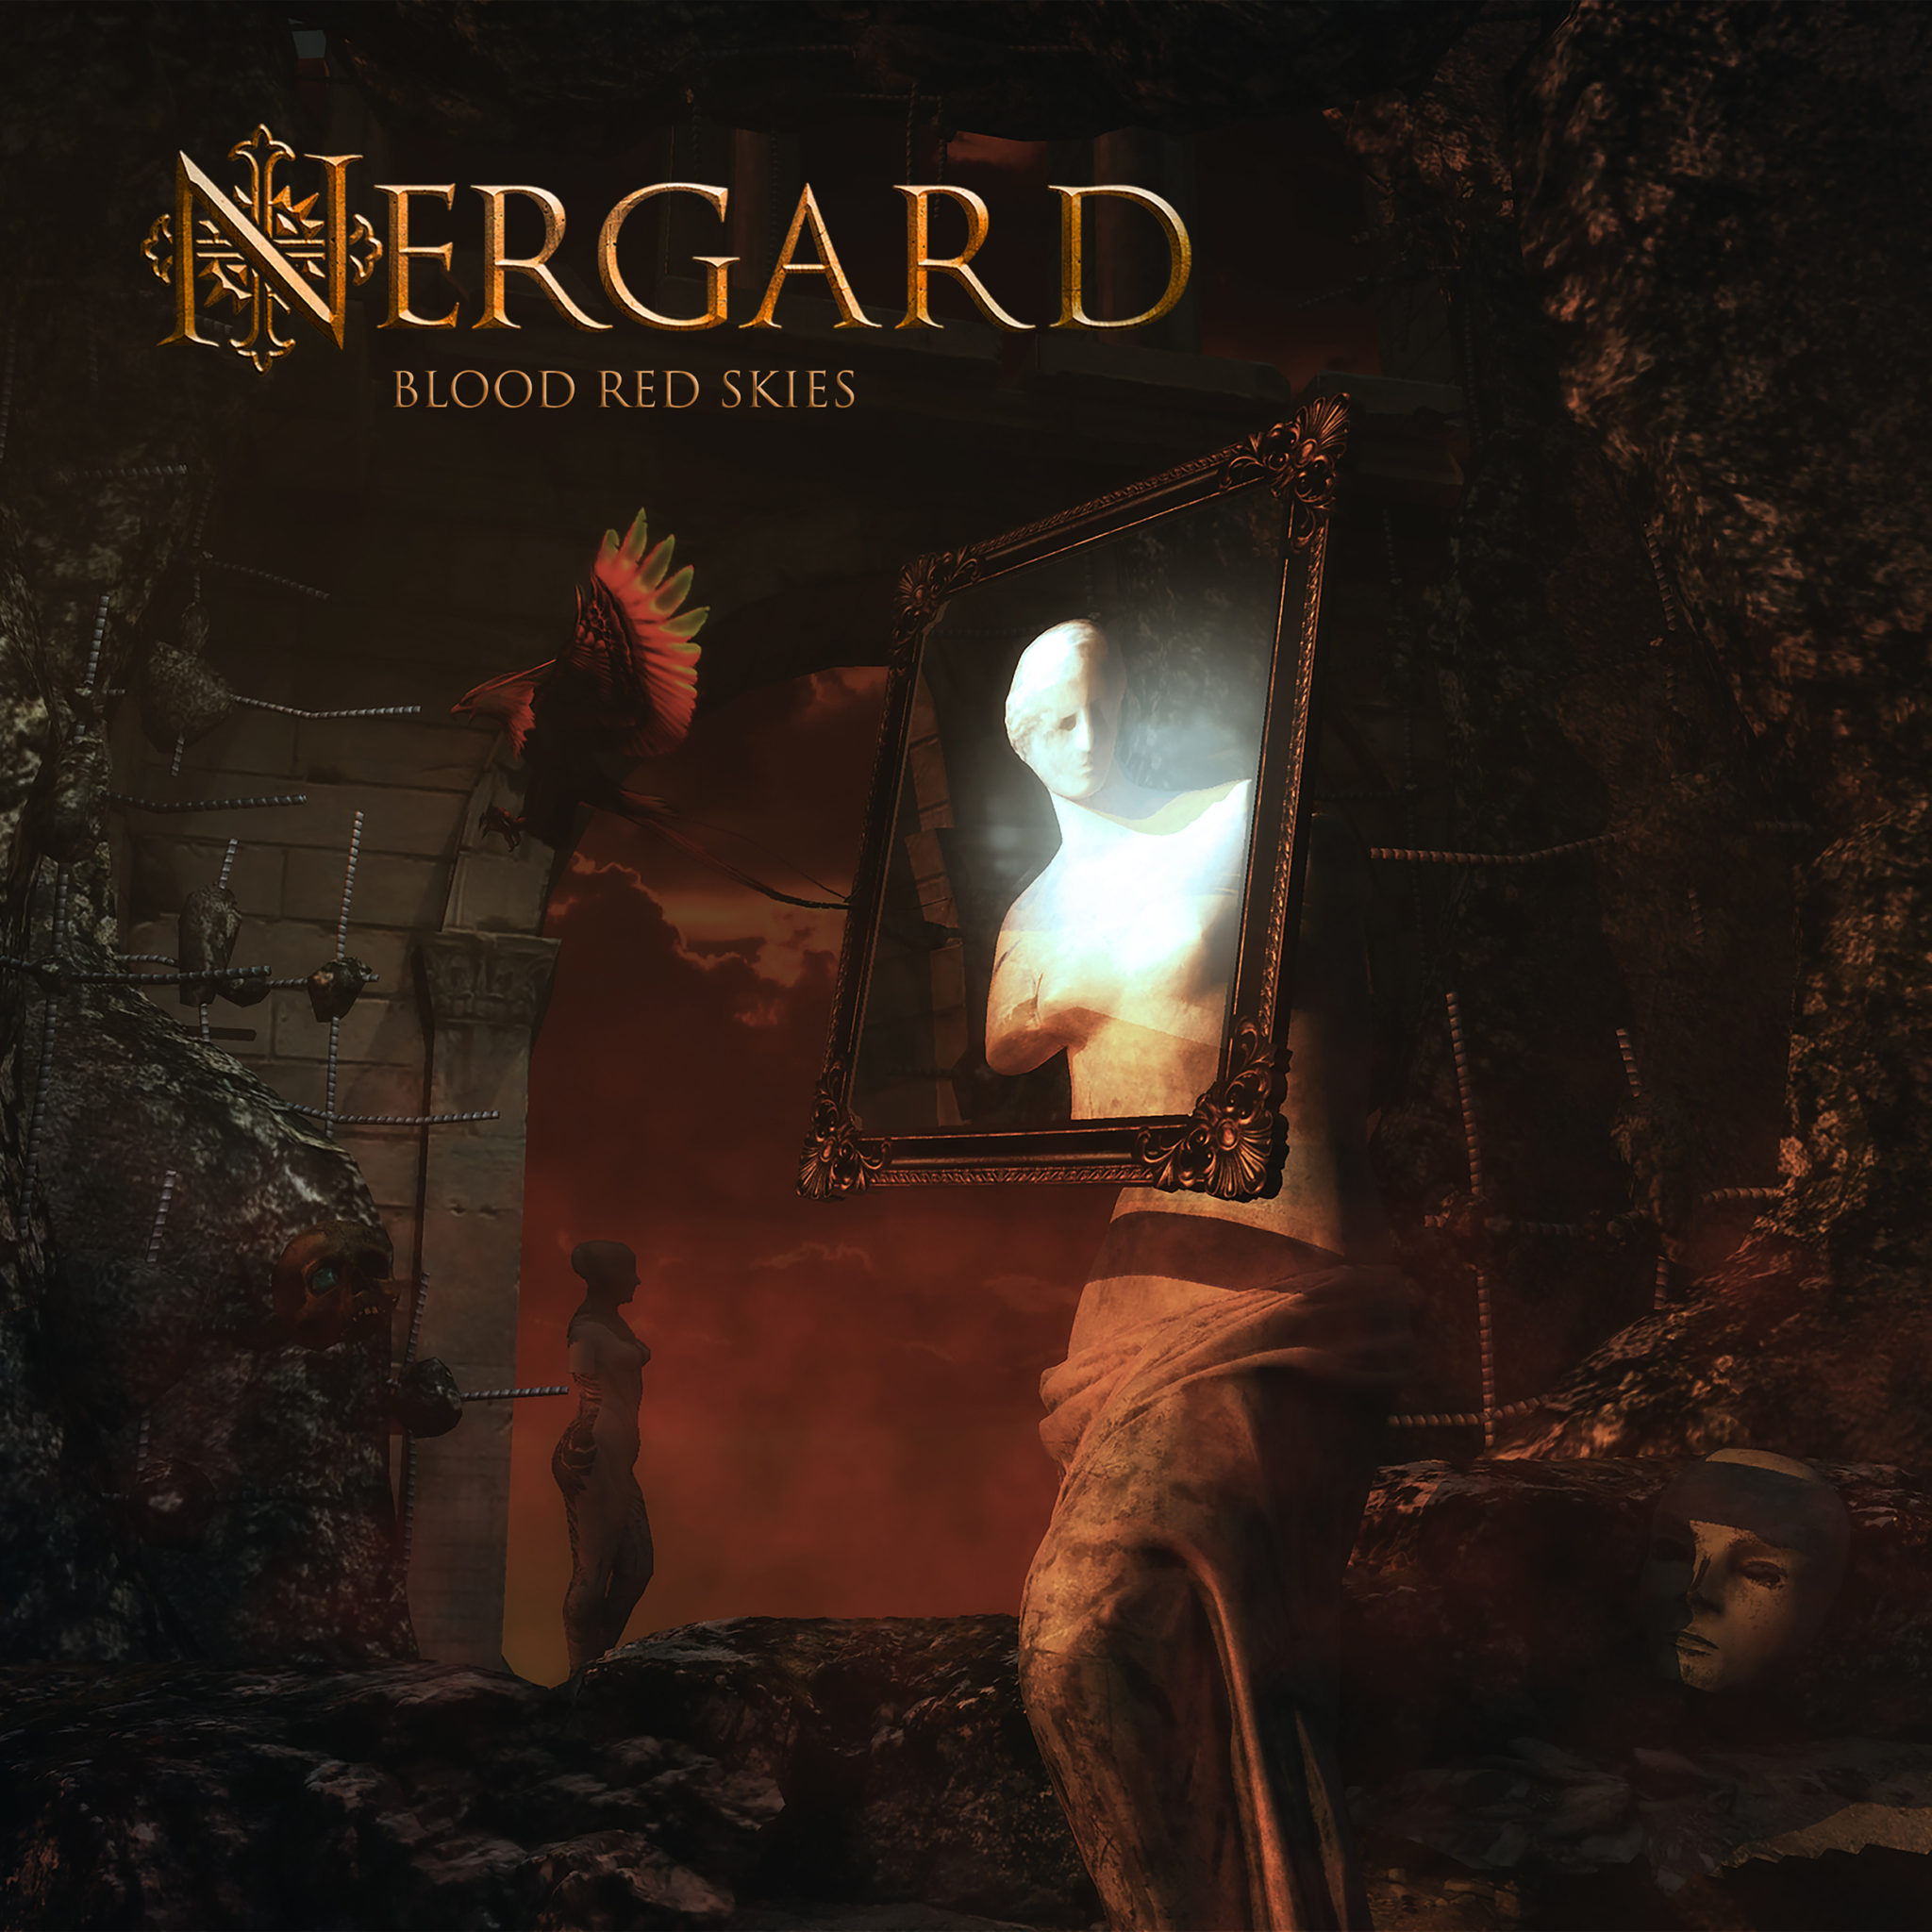 Nergard - Blood Red Skies cover art